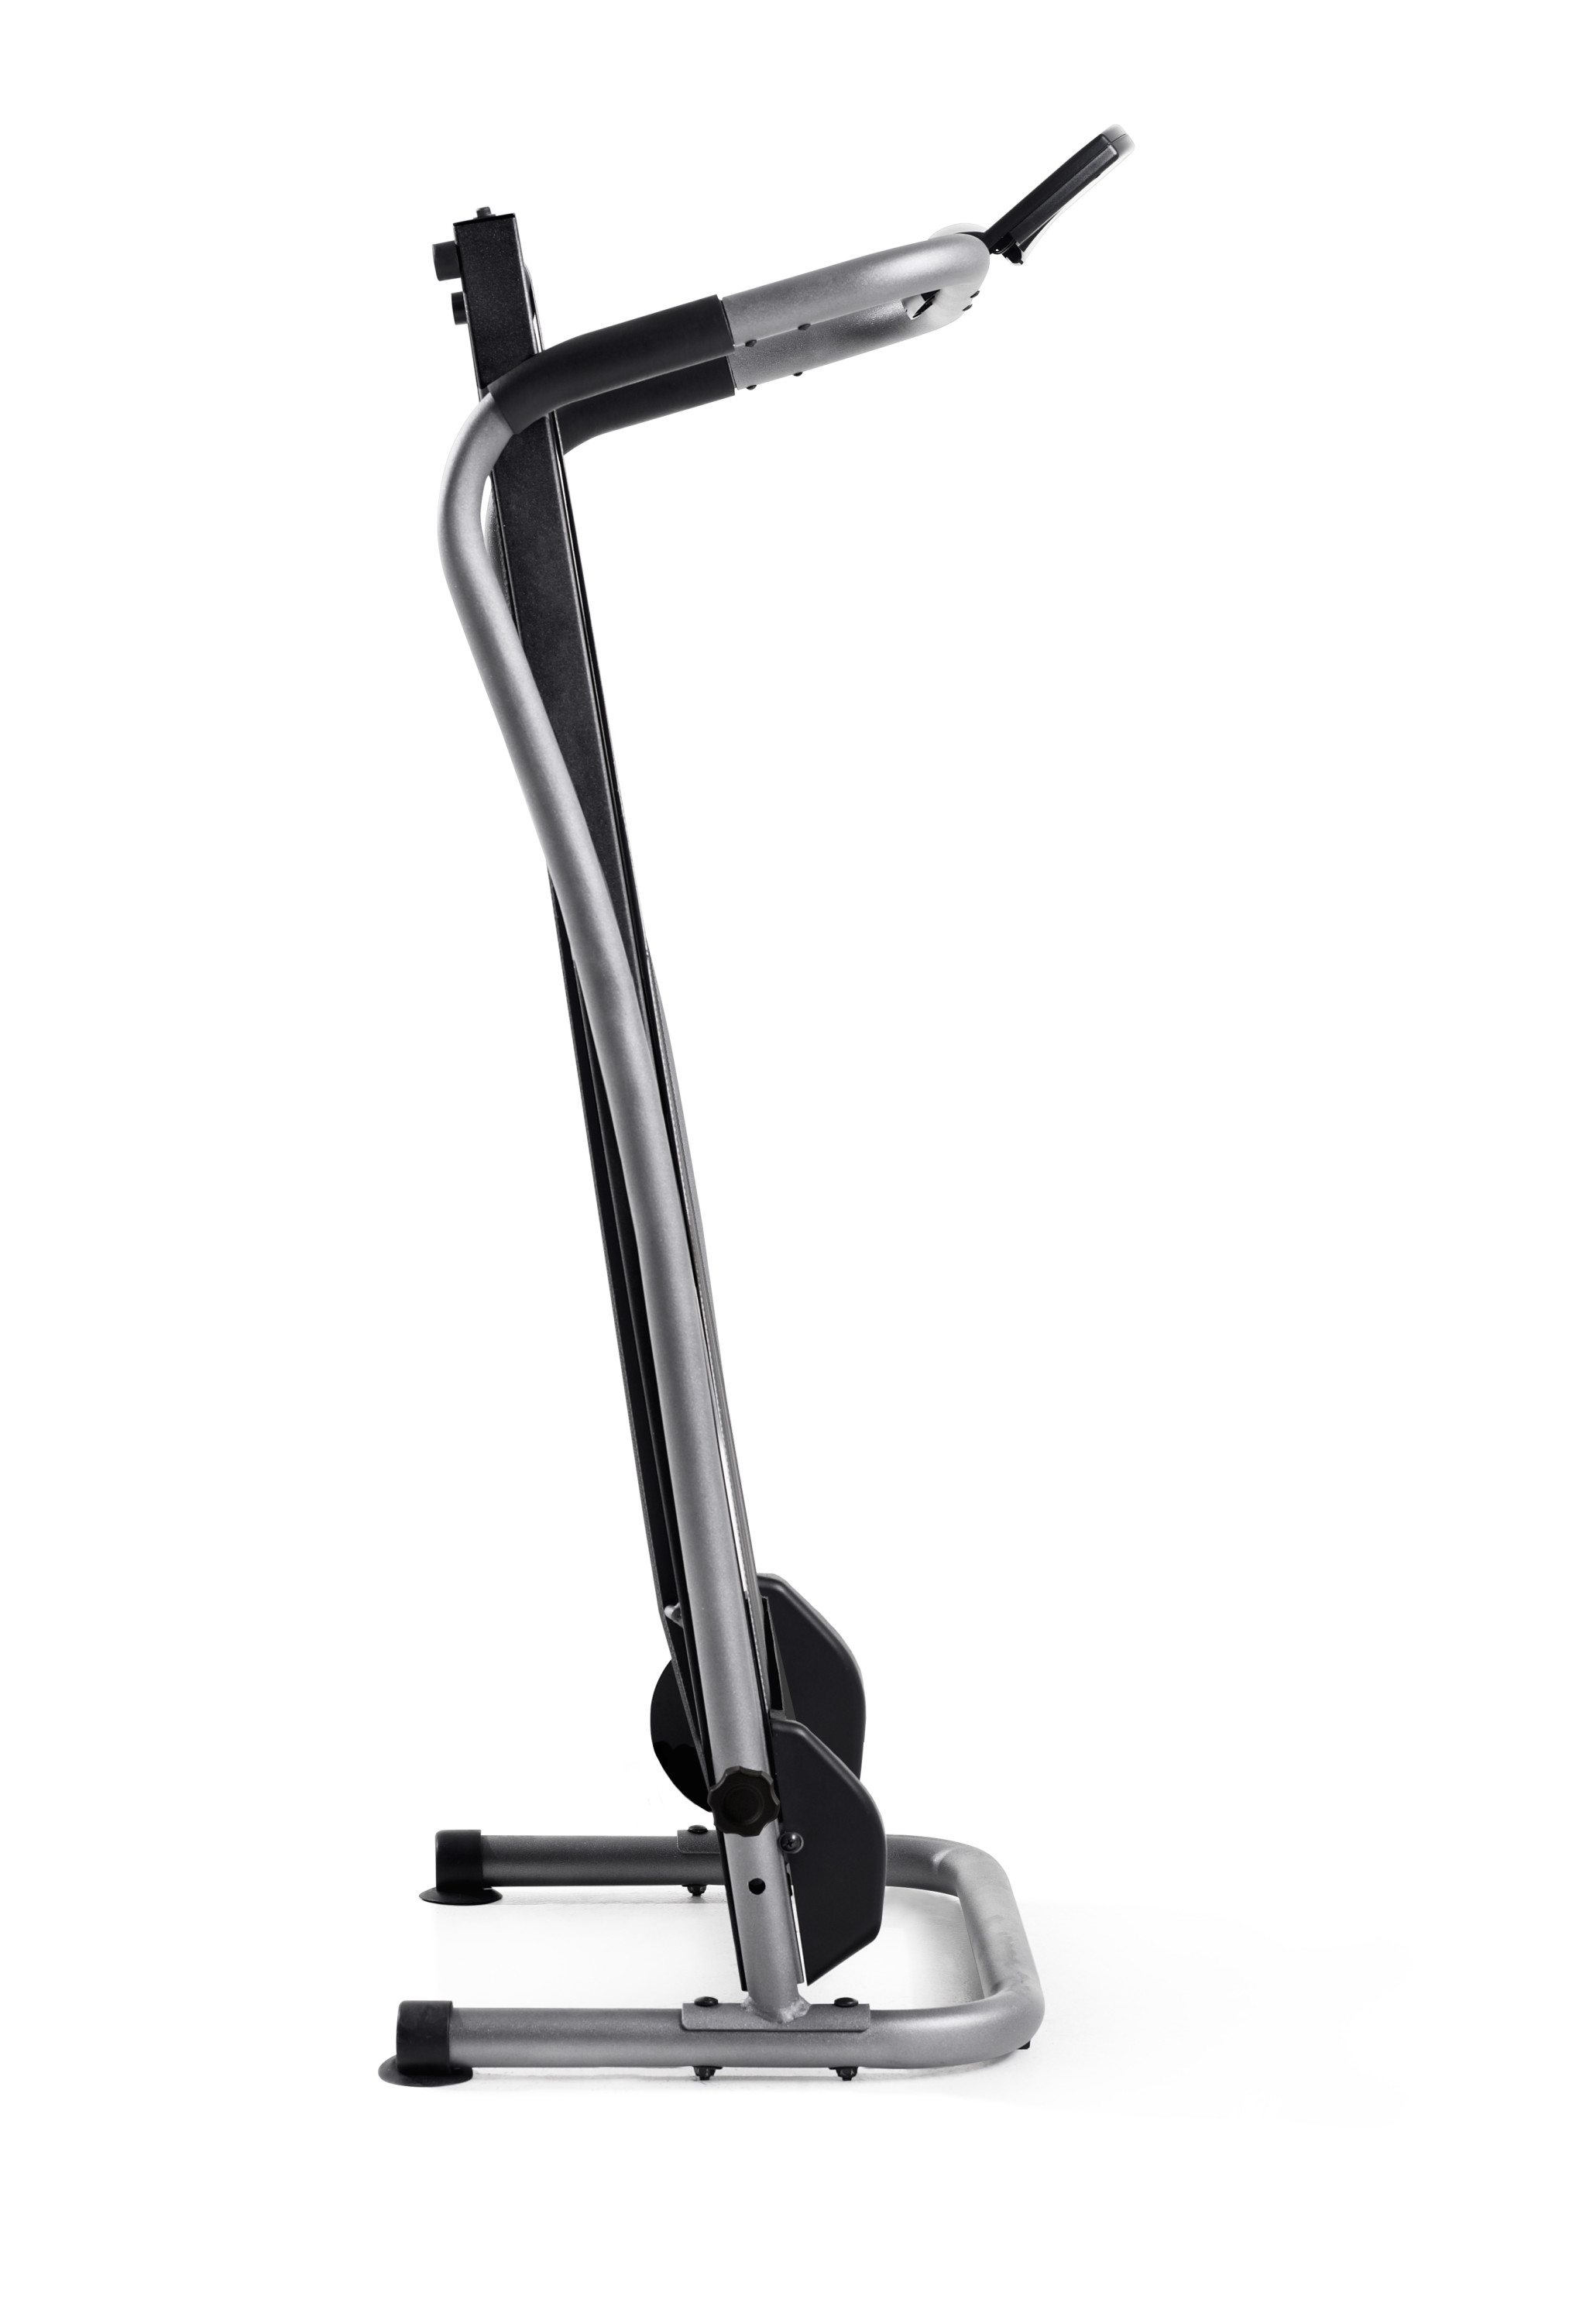 Weslo CardioStride 4.0 Manual Folding Treadmill with Adjustable Incline and LCD Window Display - image 3 of 12